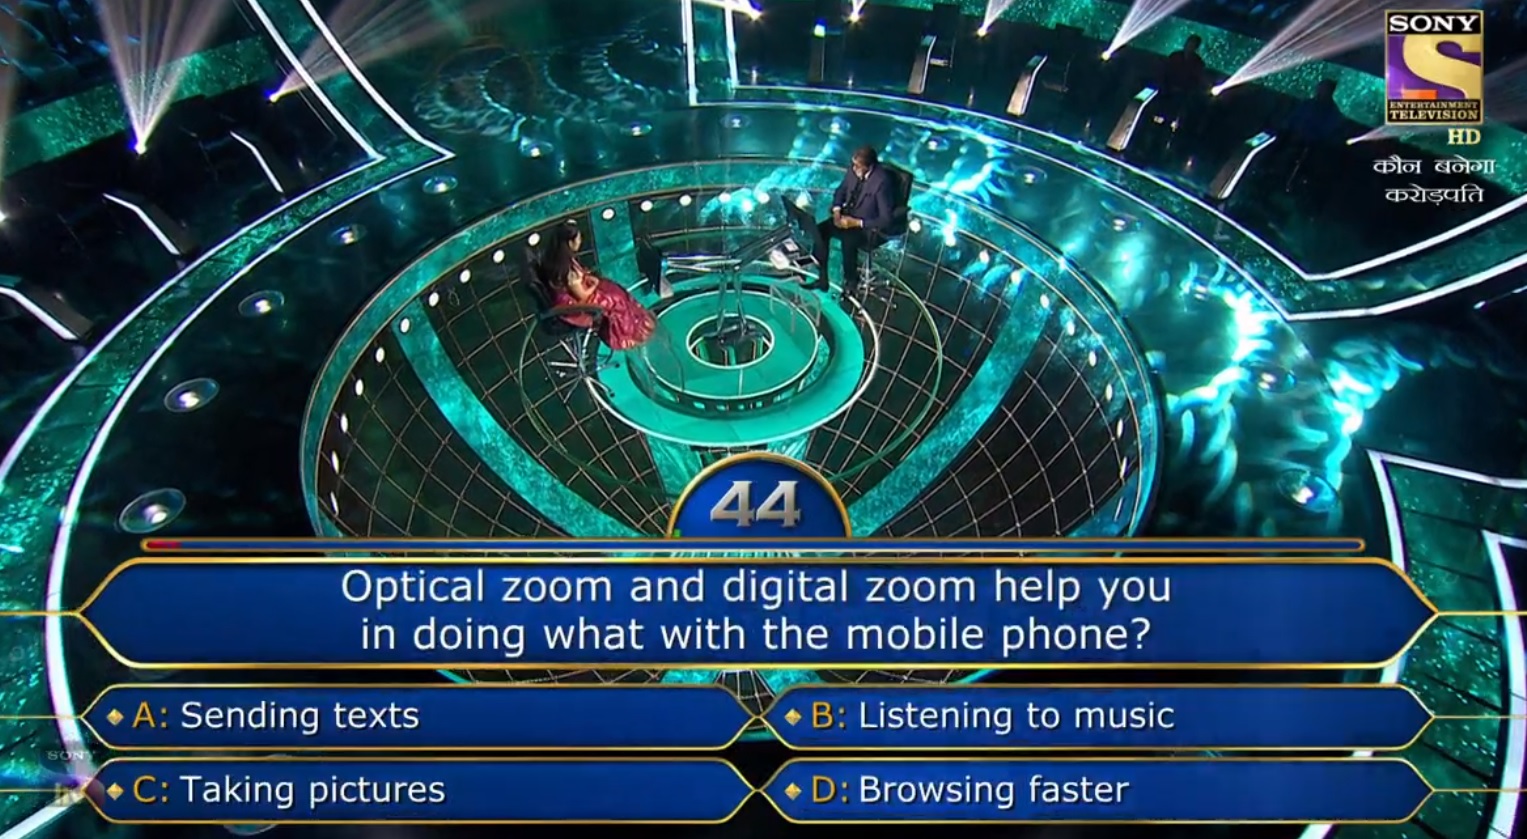 Ques : Optical zoom and digital zoom help you in doing what with the mobile phone?